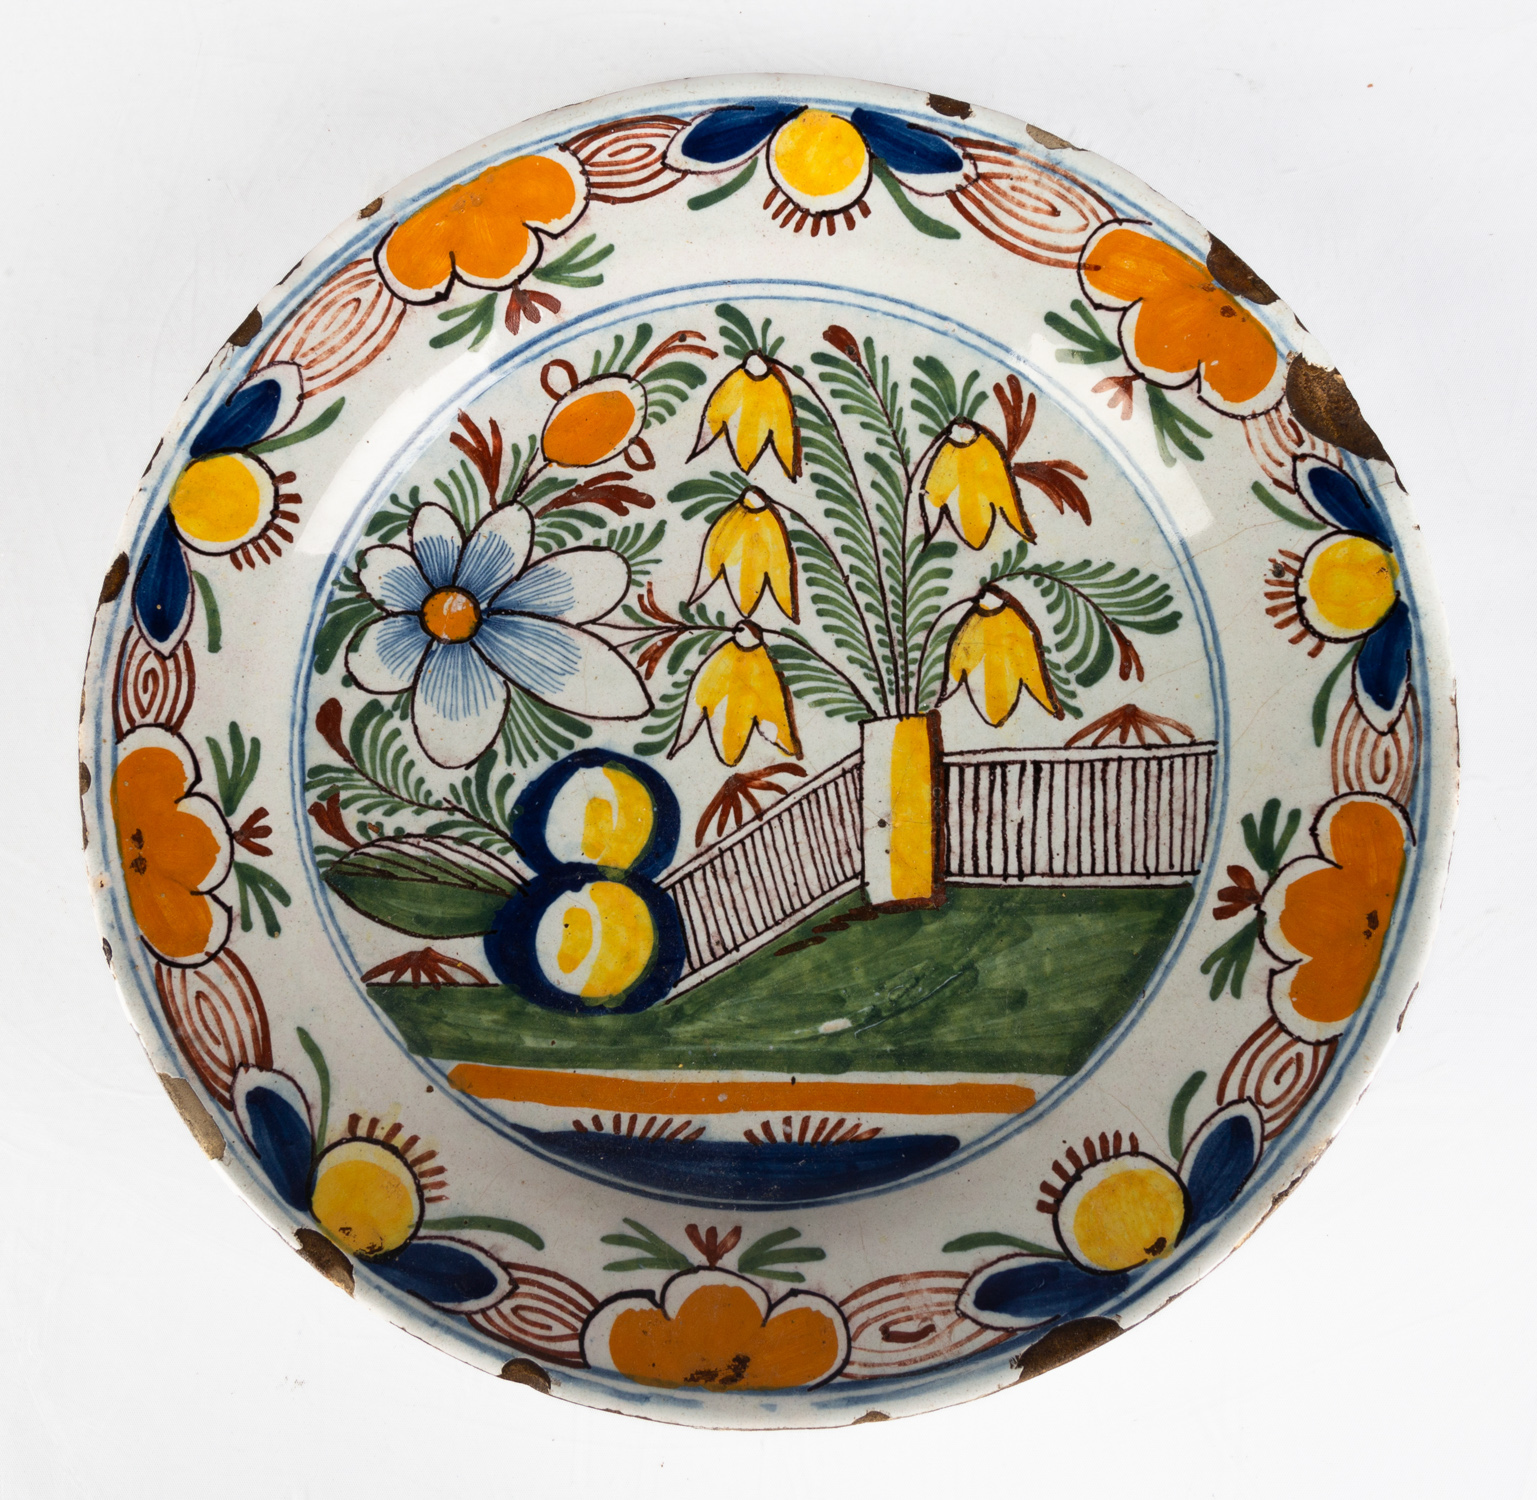 EARLY DELFT CHARGER Early Delft 2faf75e